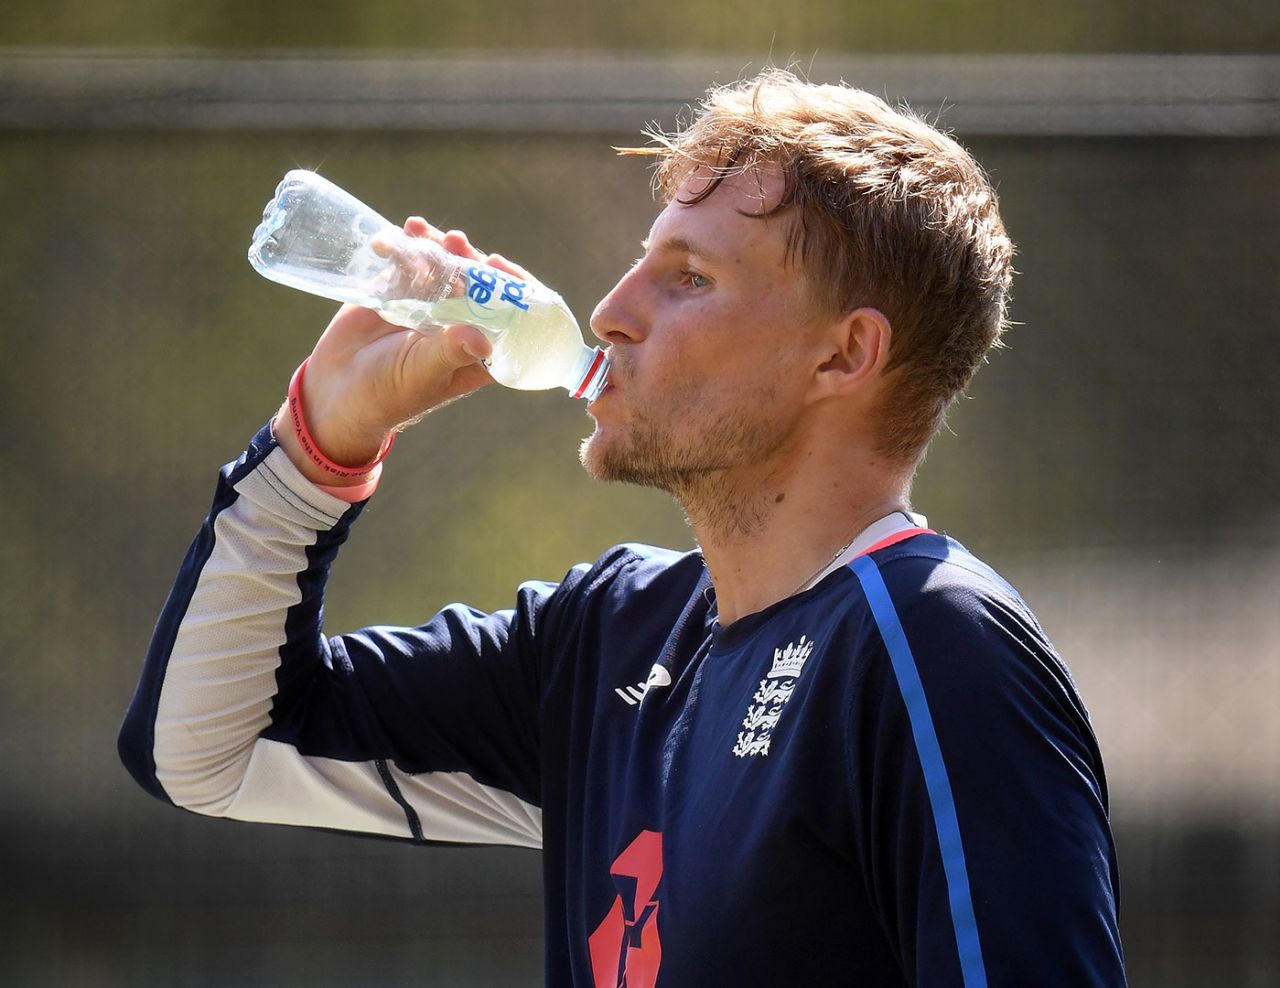 Thirsty work: Joe Root refreshes during nets, Adelaide, November 30, 2017